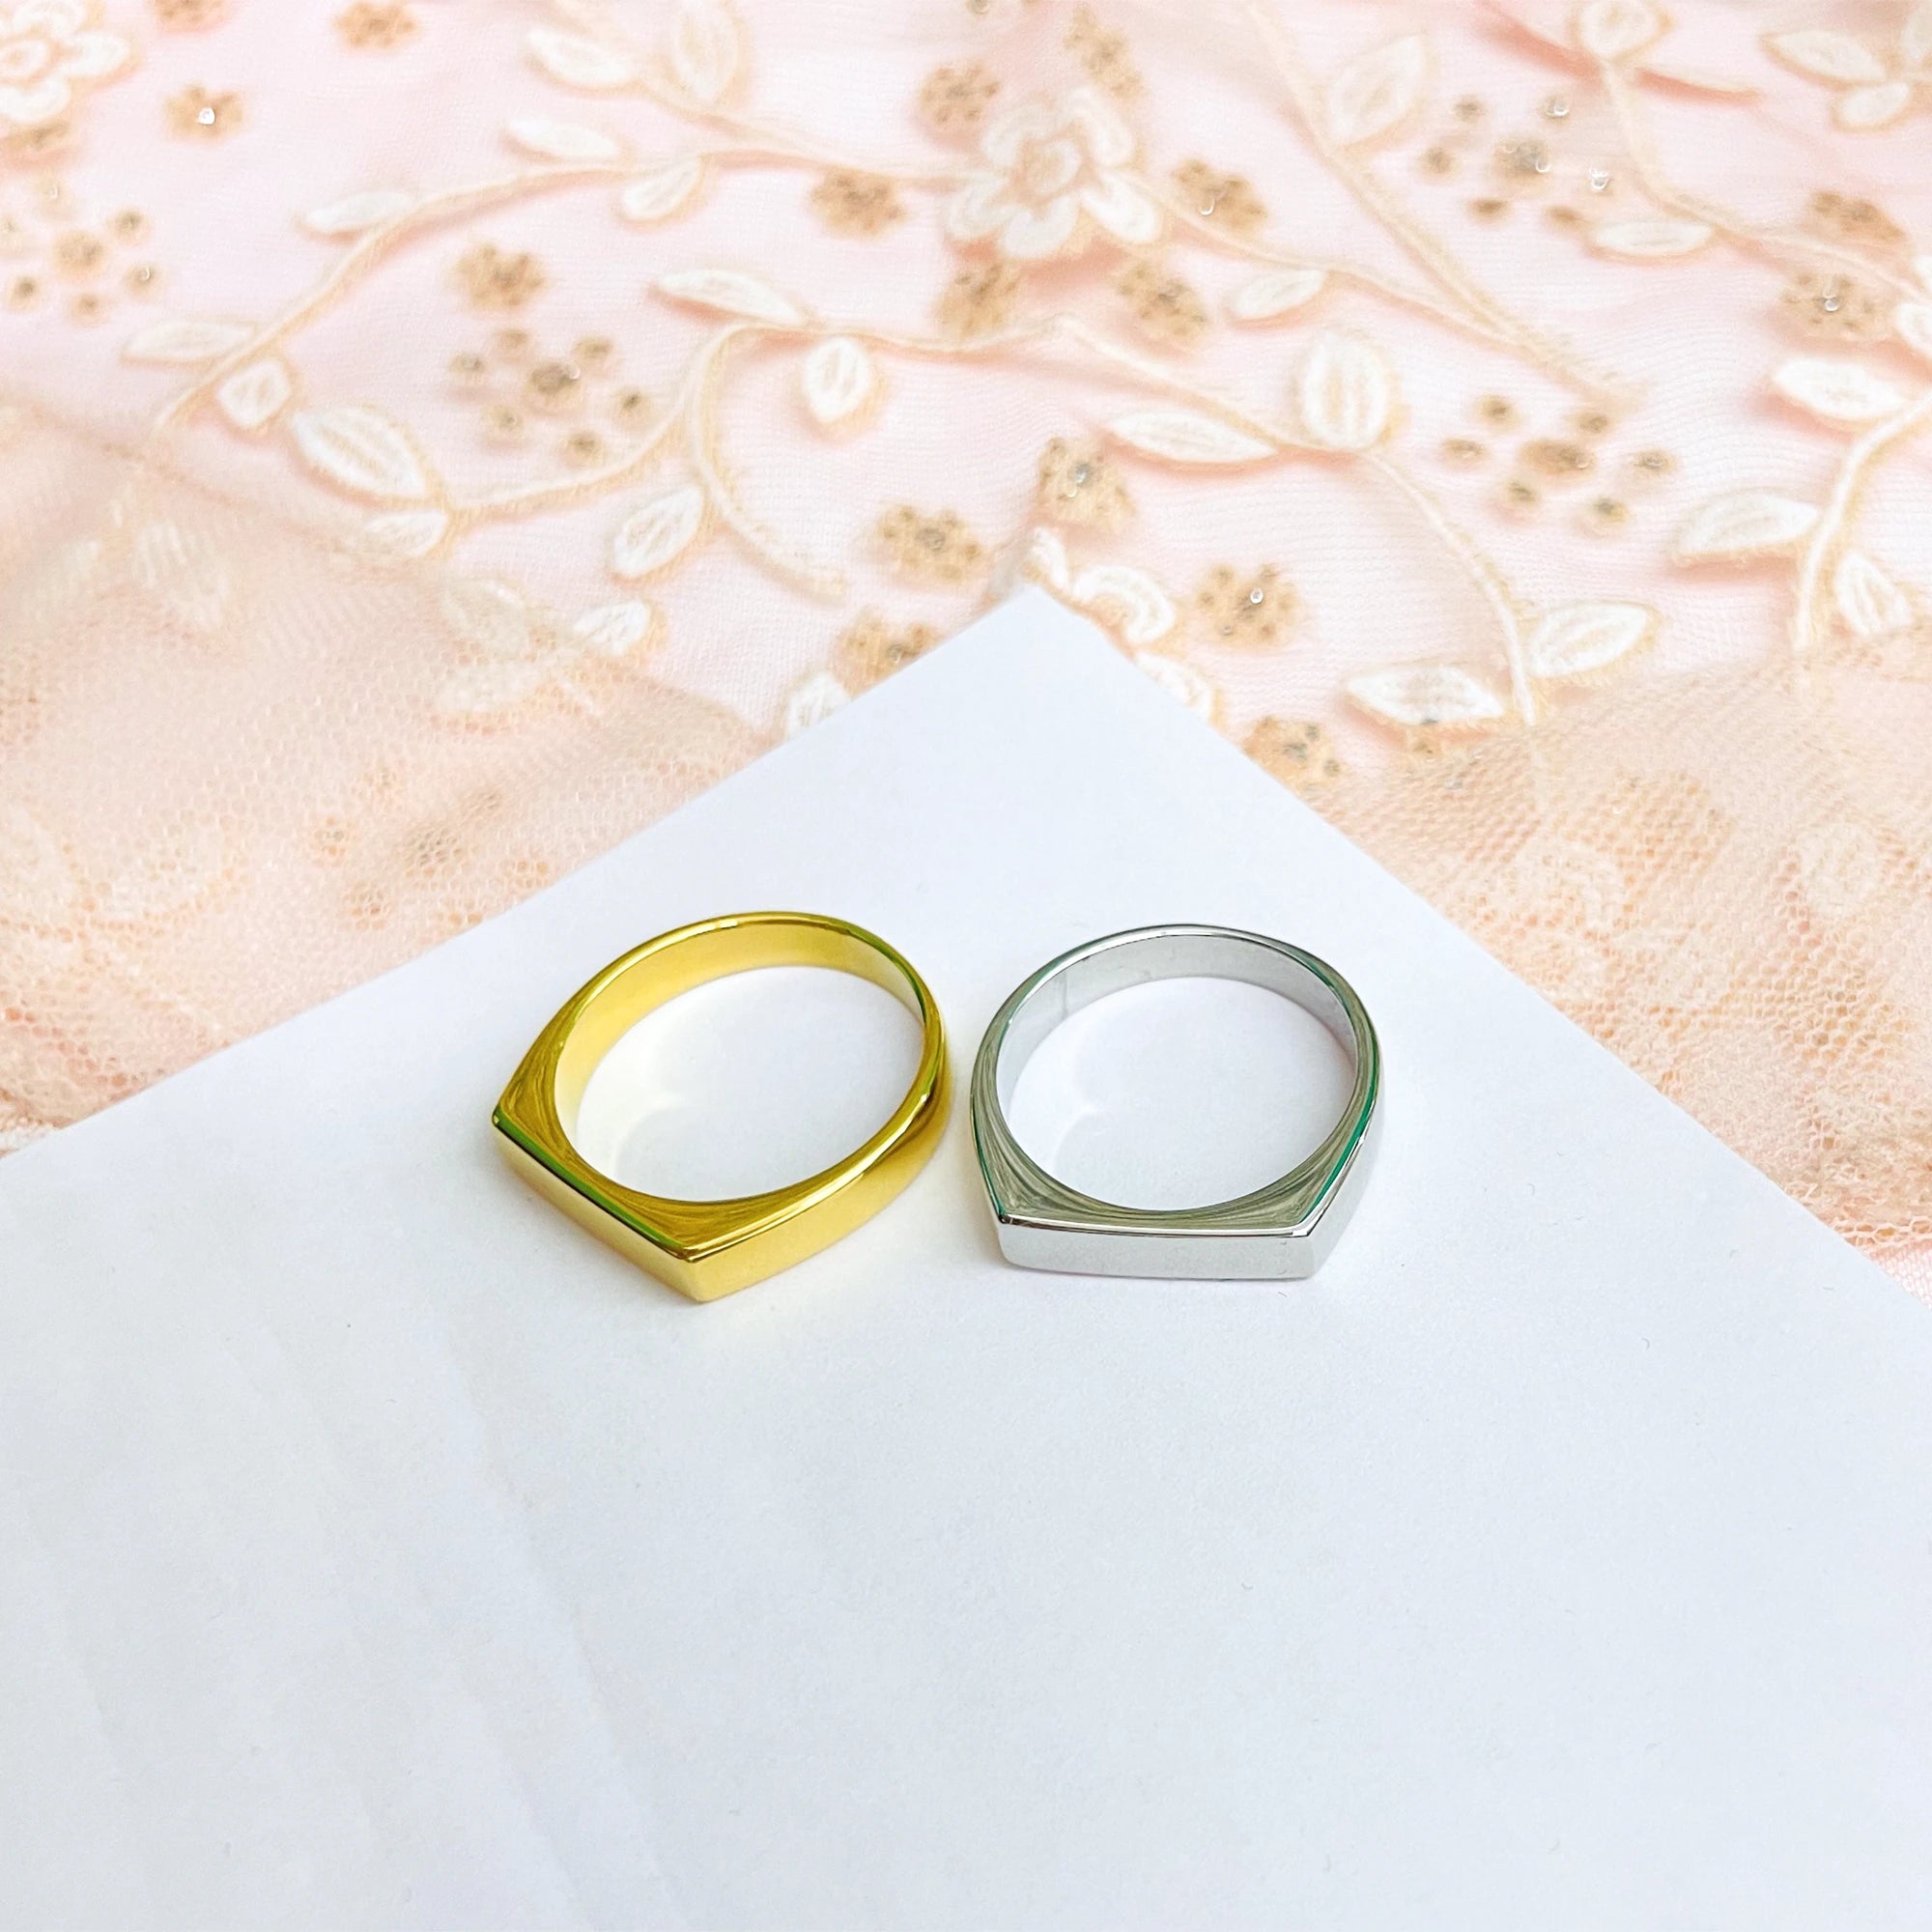 Personalized Gold Silver Rings, Dainty Name ring